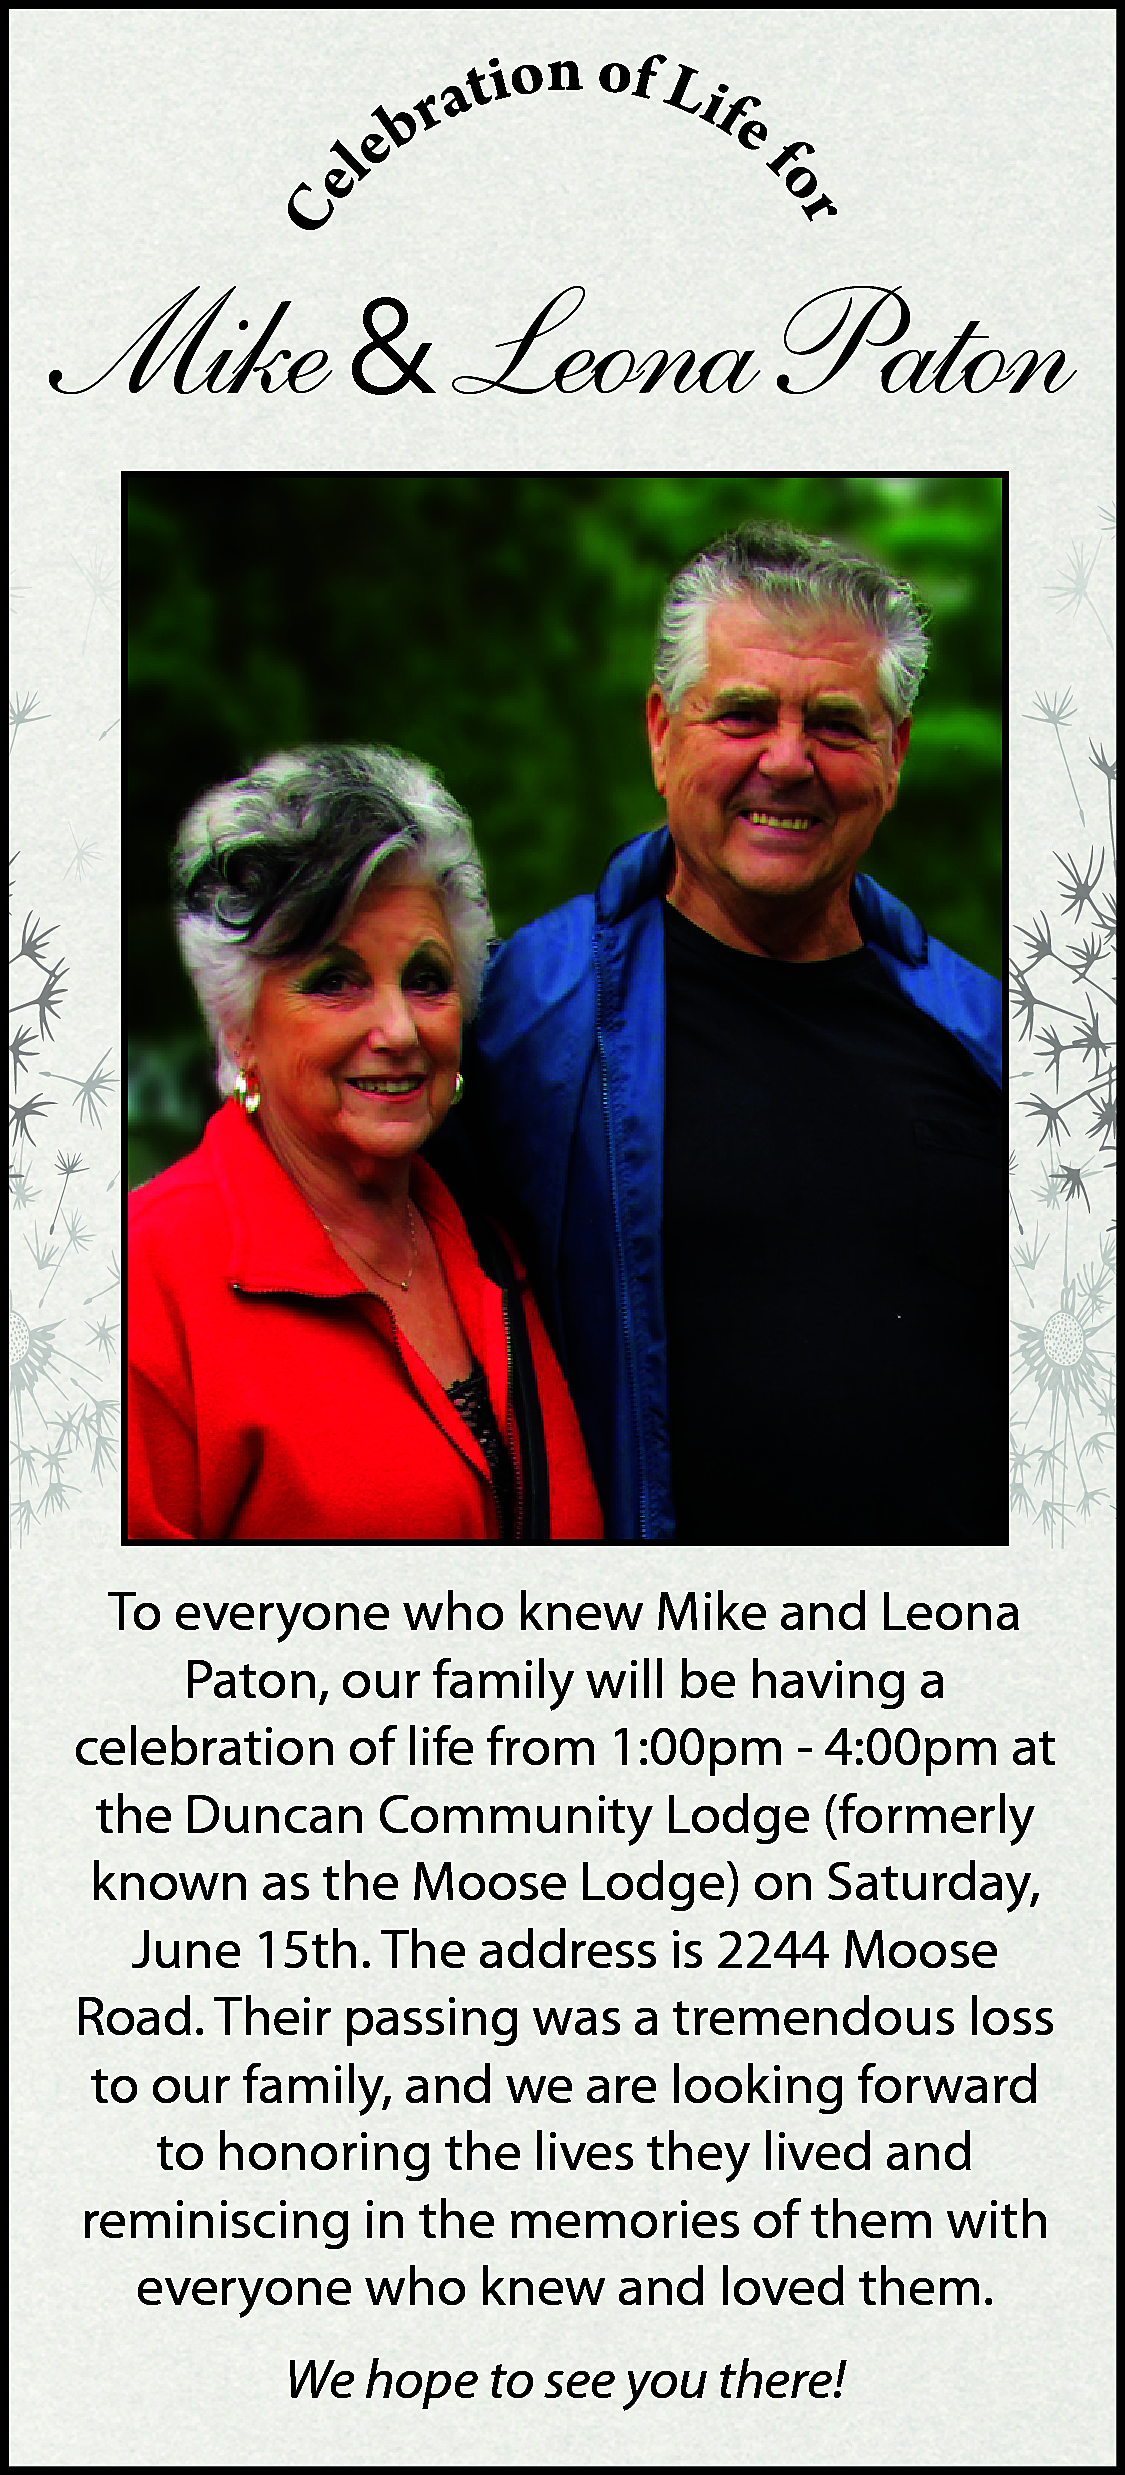 Ce <br> <br>r <br>fo <br>  Ce    r  fo    on of Lif  rati  e  b  e  l    Mike & Leona Paton    To everyone who knew Mike and Leona  Paton, our family will be having a  celebration of life from 1:00pm - 4:00pm at  the Duncan Community Lodge (formerly  known as the Moose Lodge) on Saturday,  June 15th. The address is 2244 Moose  Road. Their passing was a tremendous loss  to our family, and we are looking forward  to honoring the lives they lived and  reminiscing in the memories of them with  everyone who knew and loved them.  We hope to see you there!    